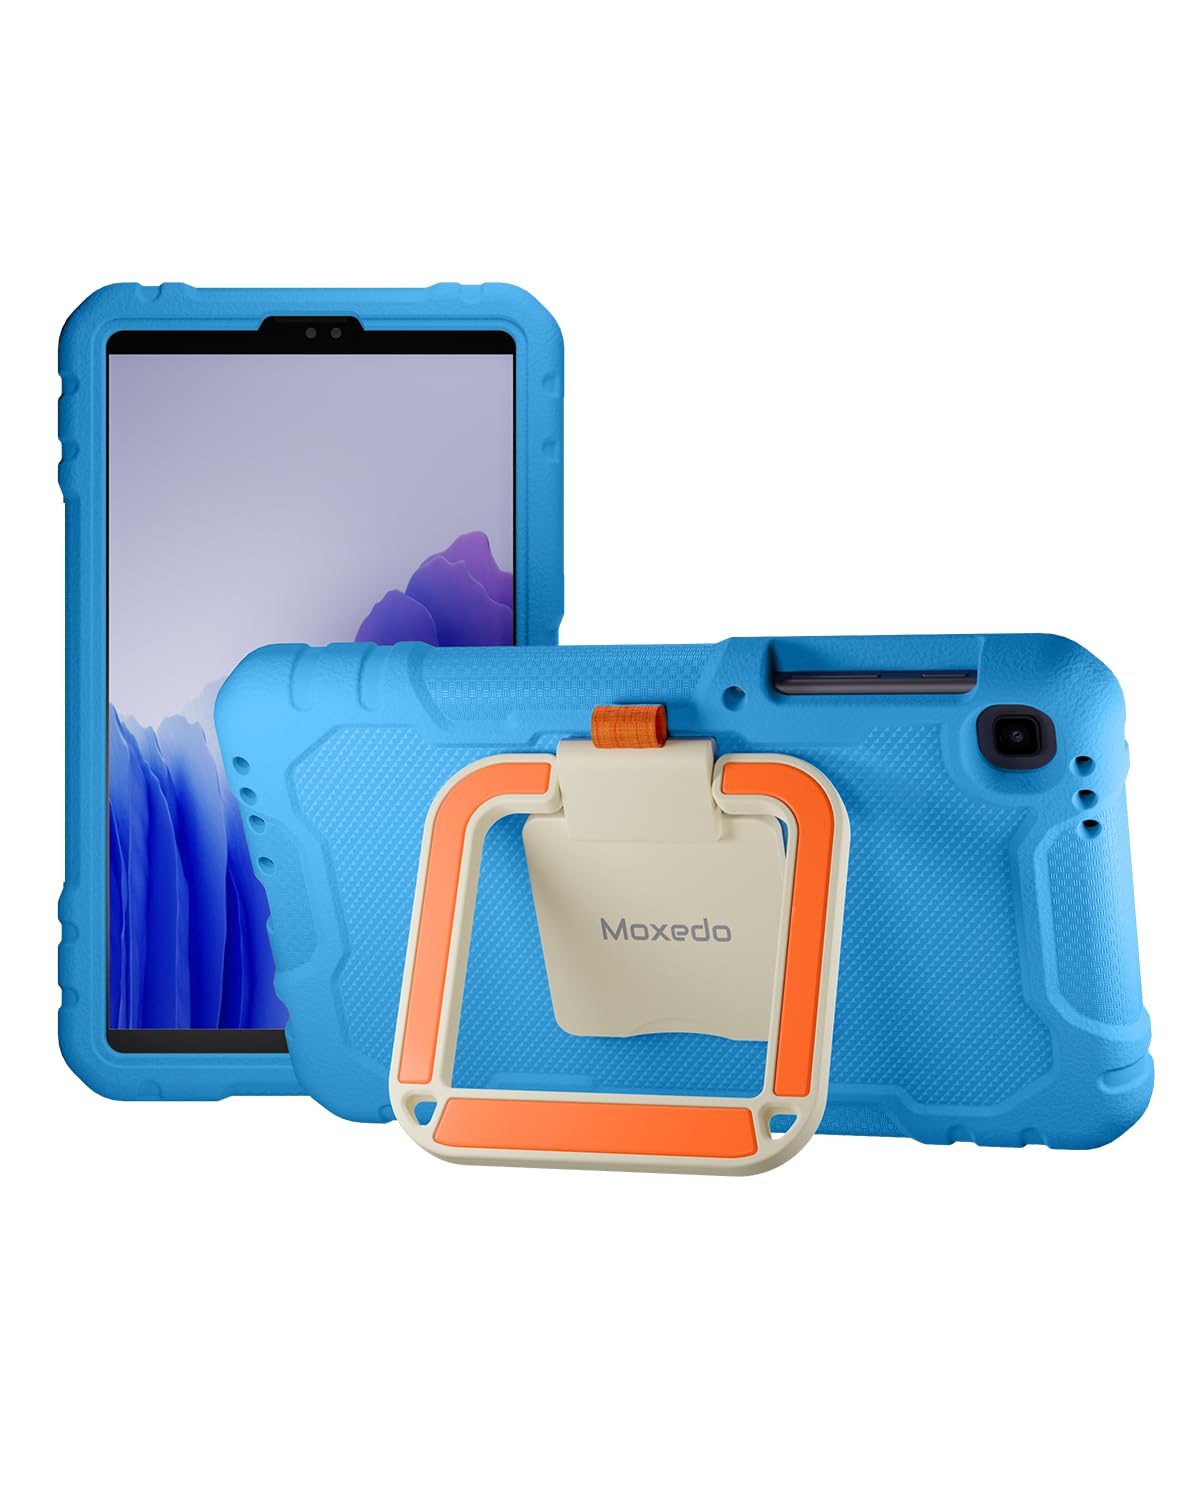 Moxedo Rugged Protective EVA Foam Silicone Kids Case Cover, Shockproof Foldable 360 Rotatable Stand Handle Grip with Pencil Holder for Galaxy Tab A7 Lite 8.7-inch